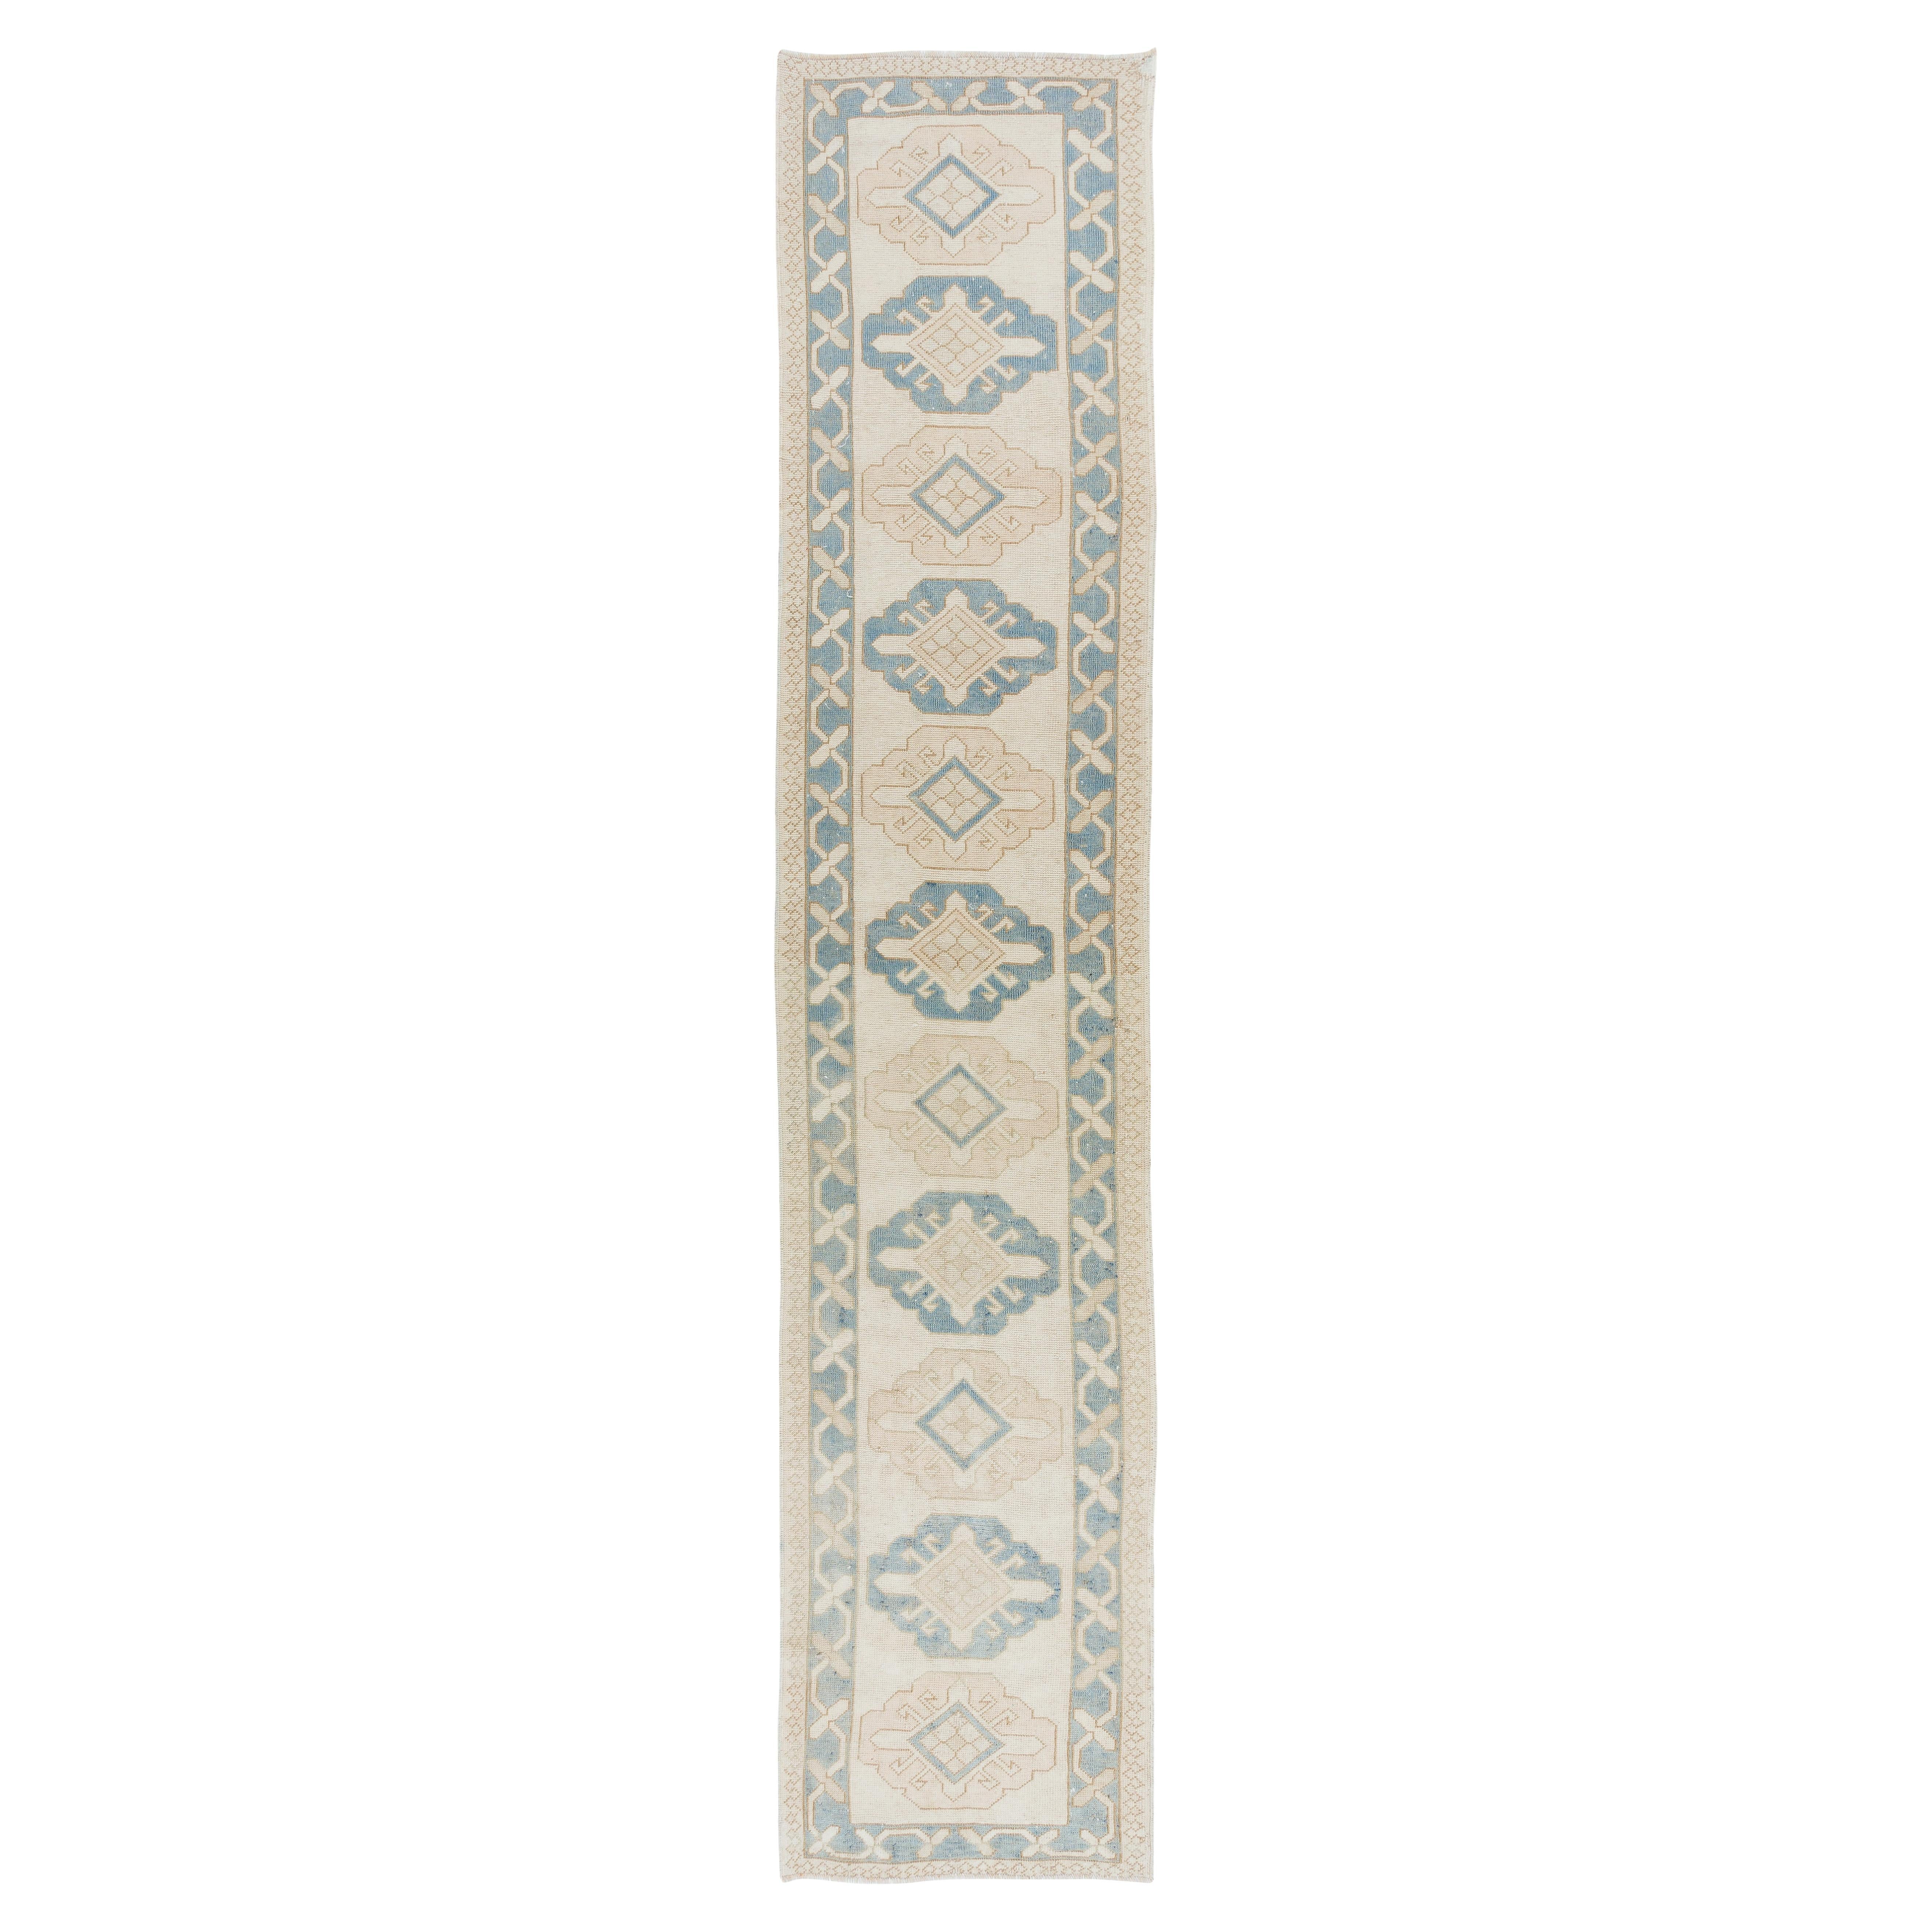 2.9x13.8 Ft Vintage Hand-Knotted Anatolian Oushak Runner Rug for Hallway Decor For Sale